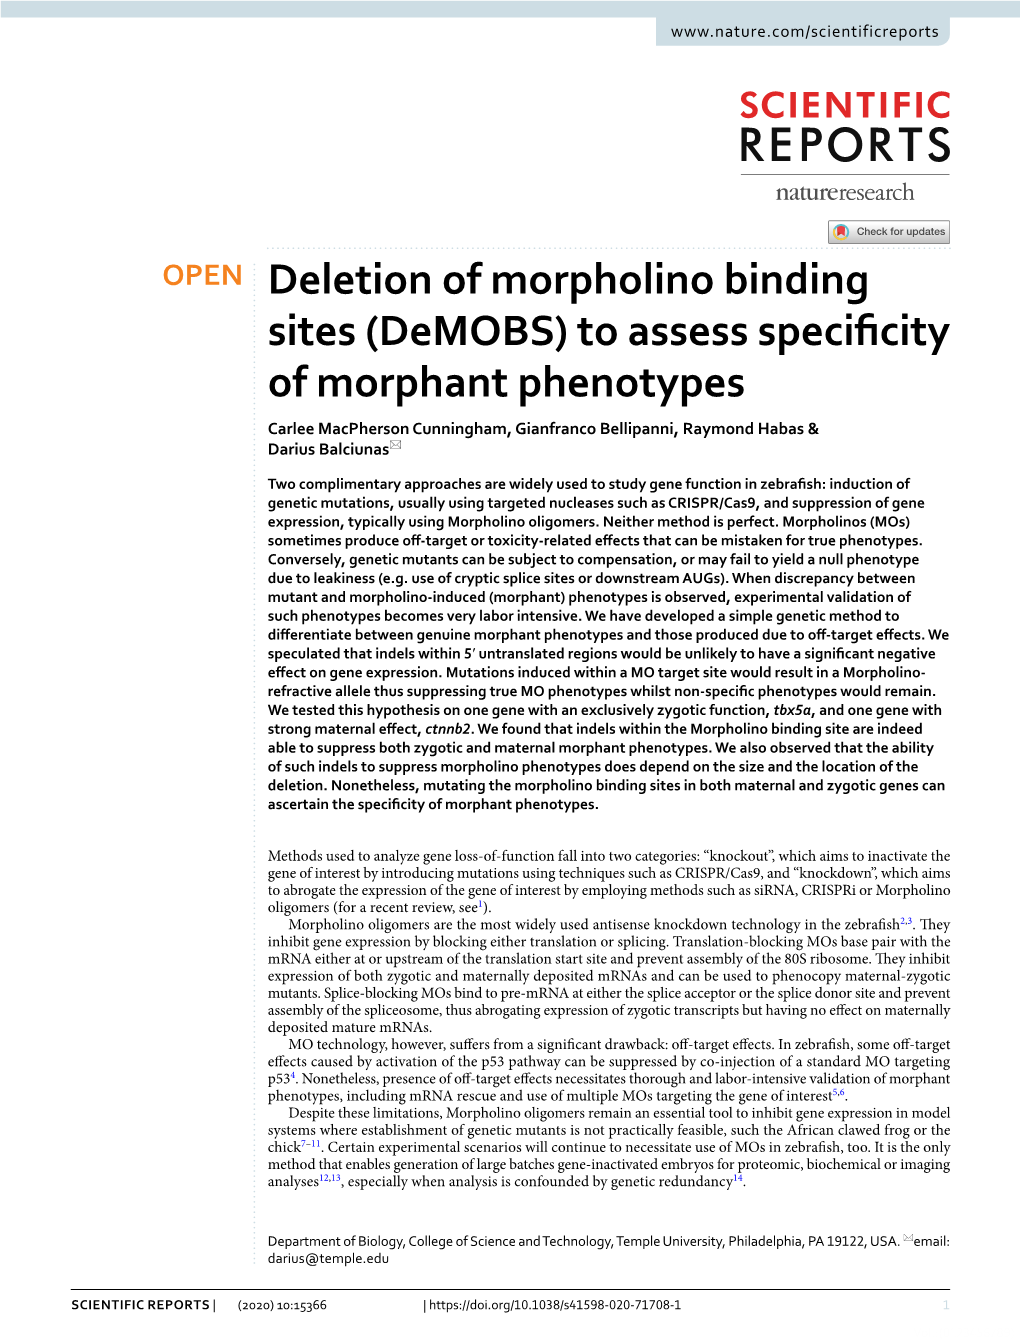 To Assess Specificity of Morphant Phenotypes